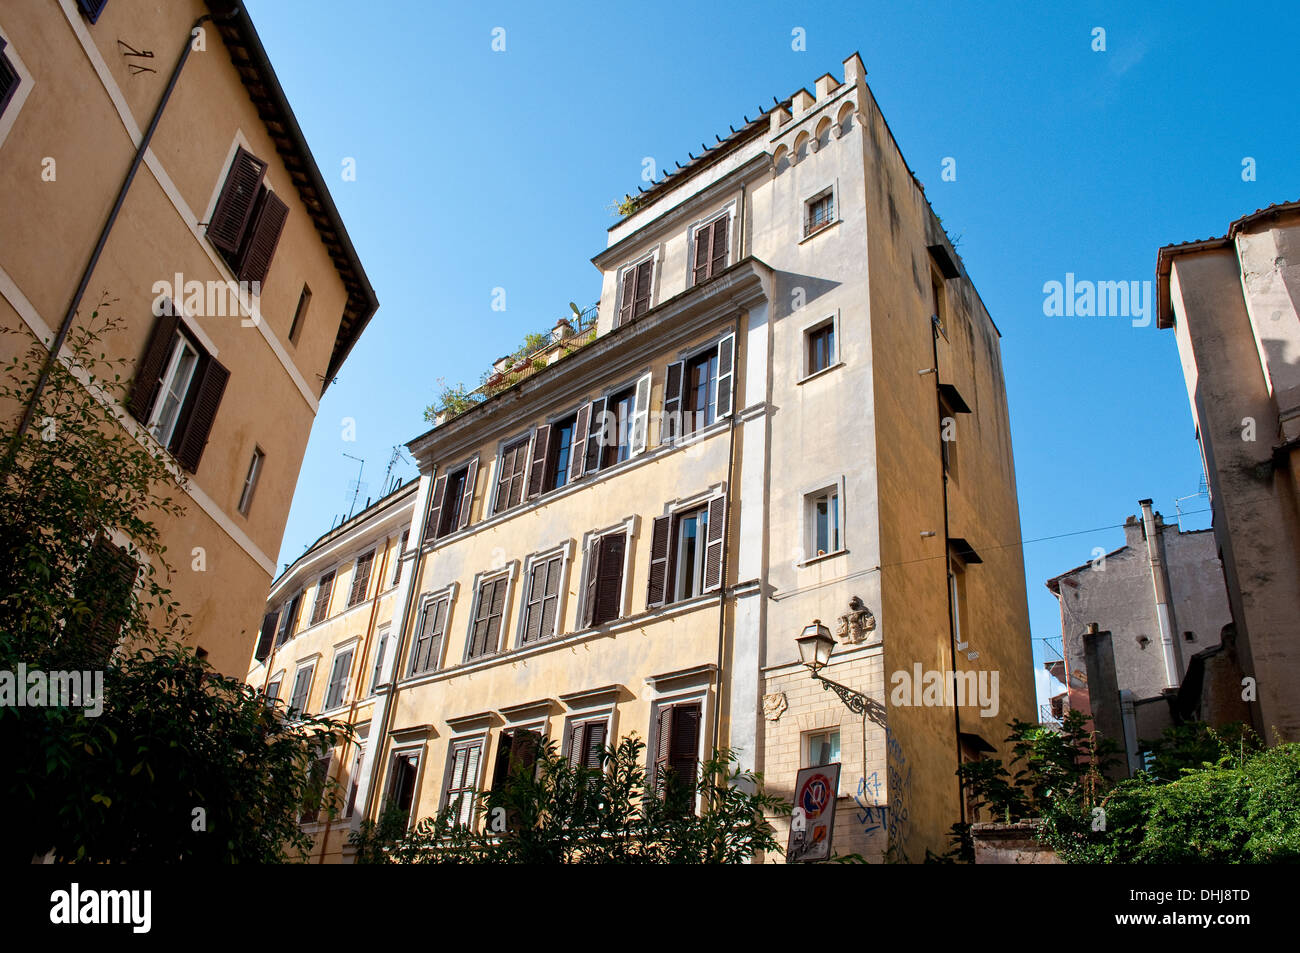 Residential house with apartments, Trastevere, Rome, Italy Stock Photo